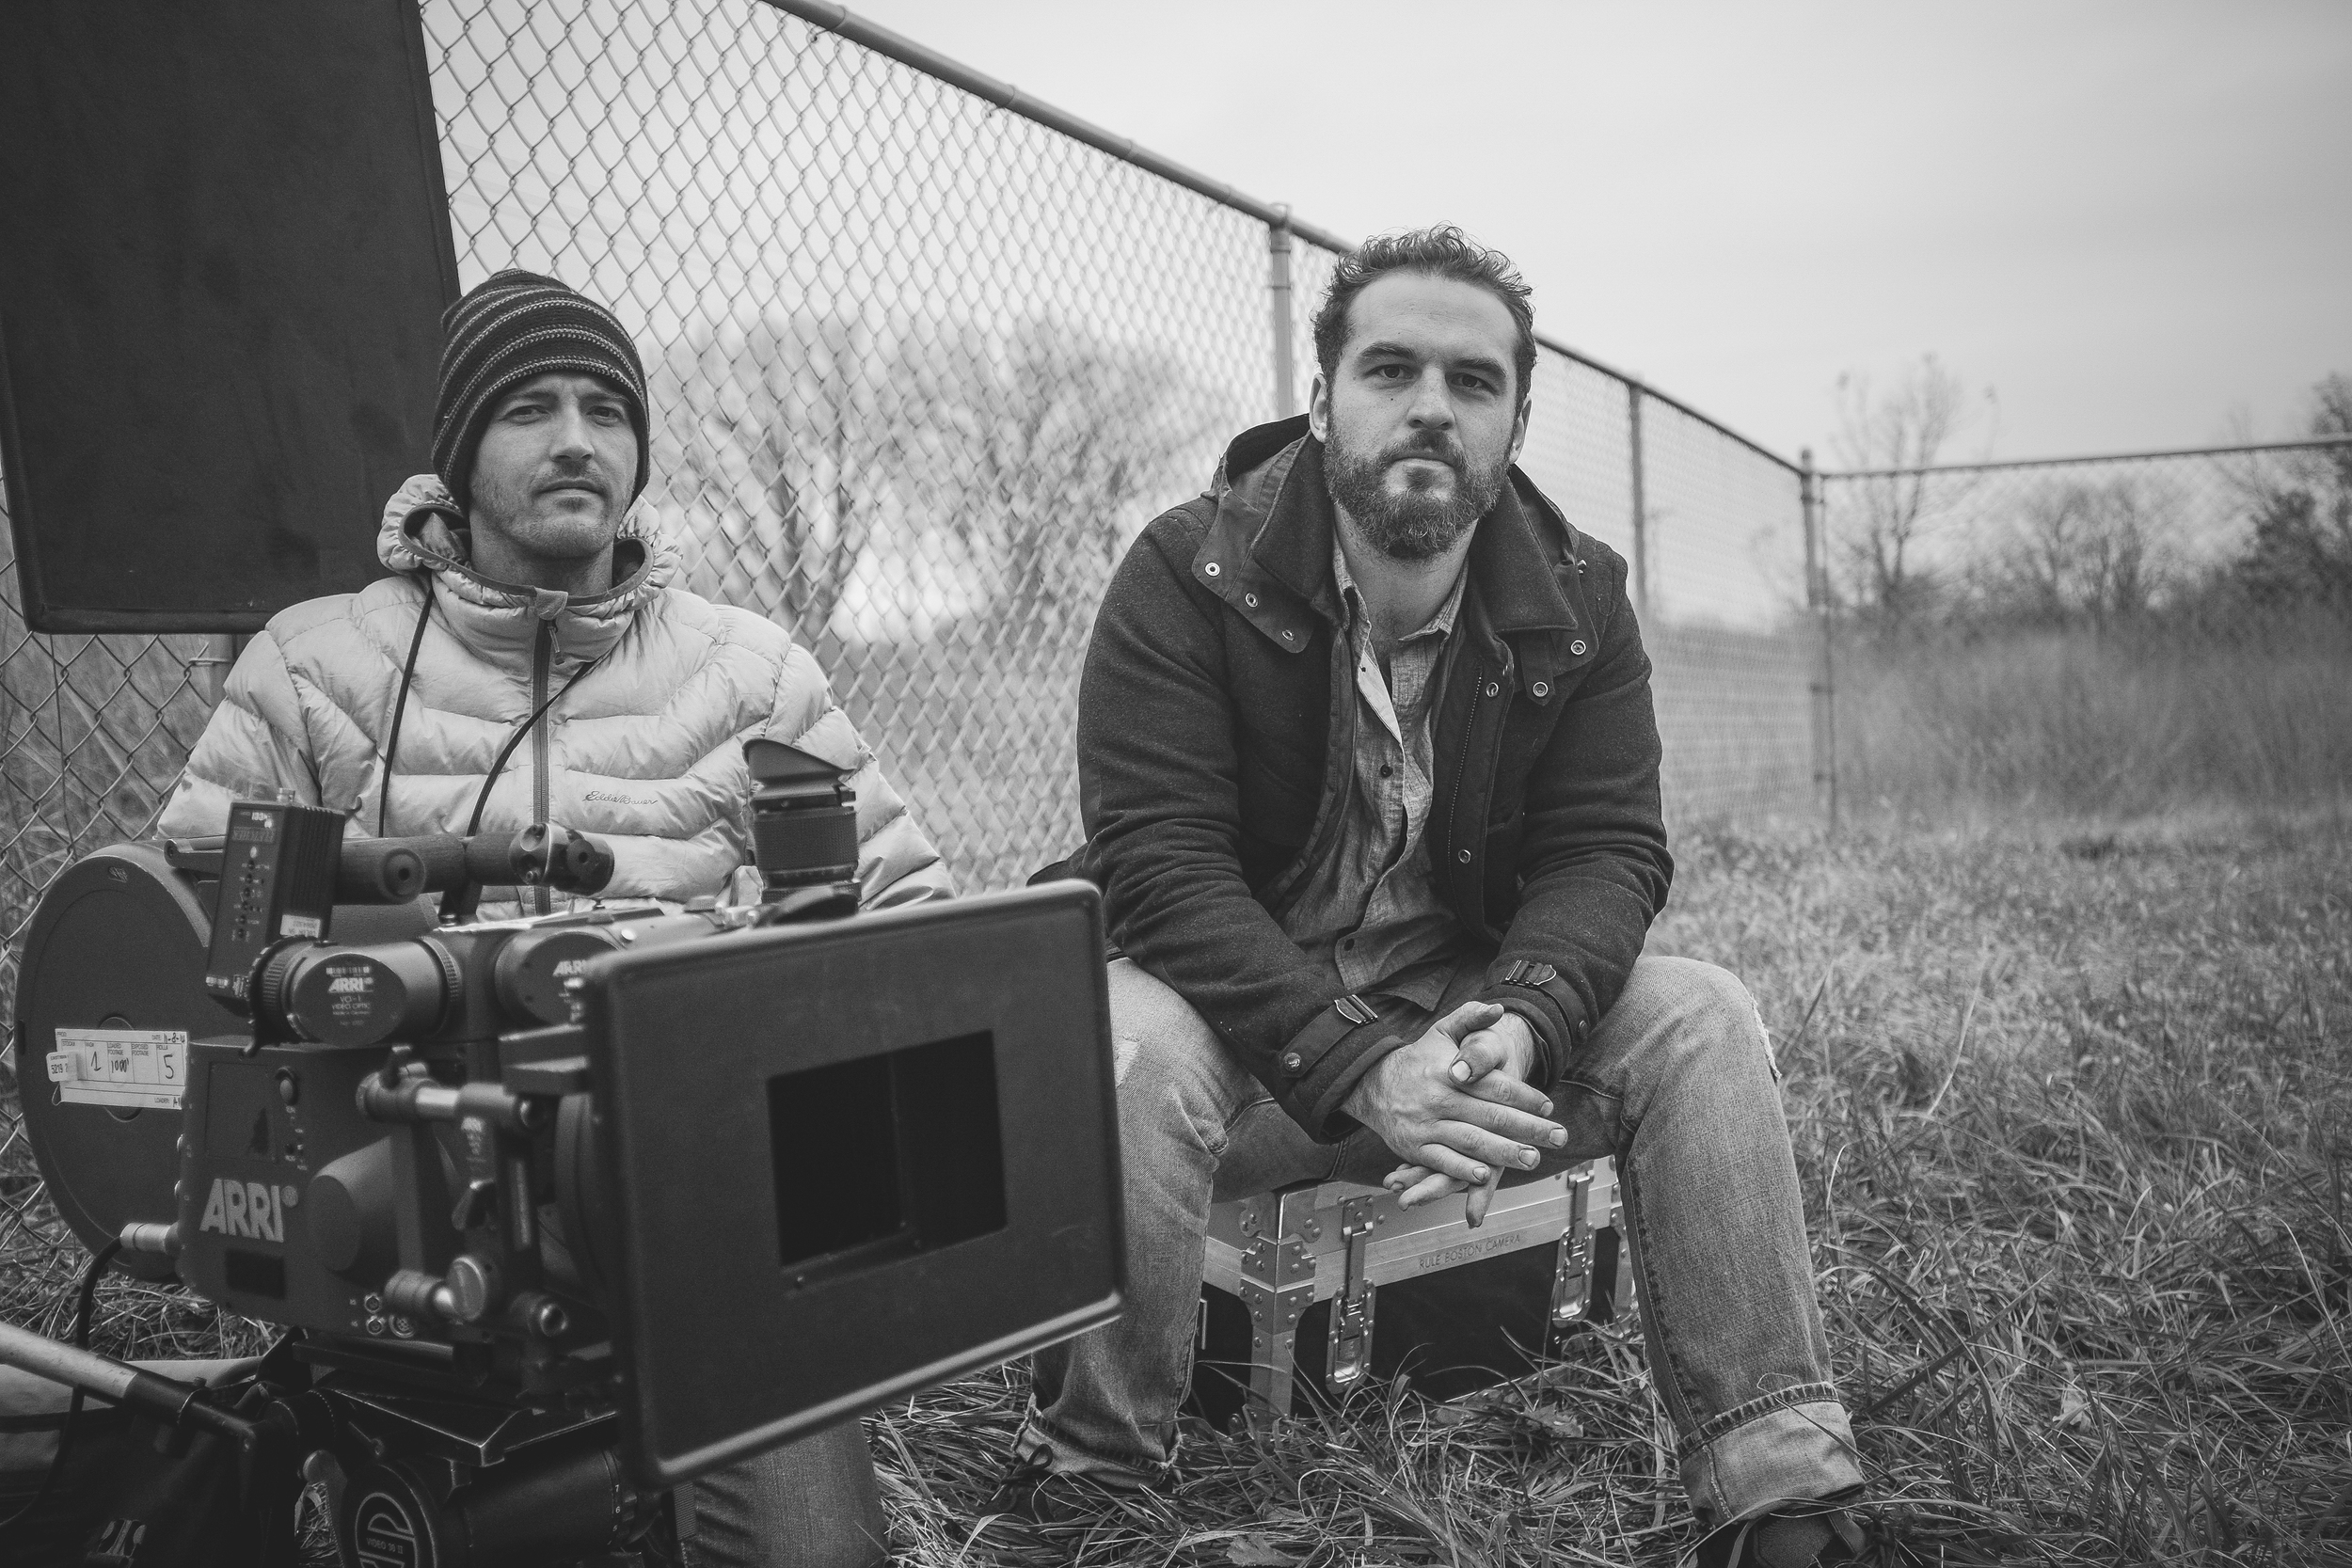 Director of Photography Daniel Cojanu (left) and Producer/Director Jesse Kreitzer on the set of Black Canaries.